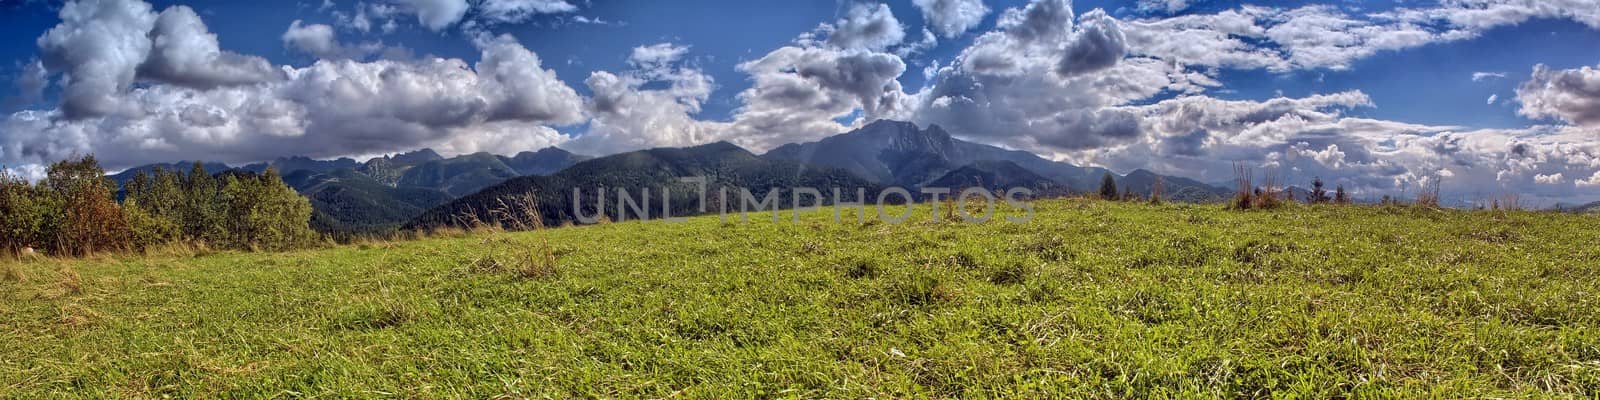 Tatra Mountains - Panorama with view on Giewont